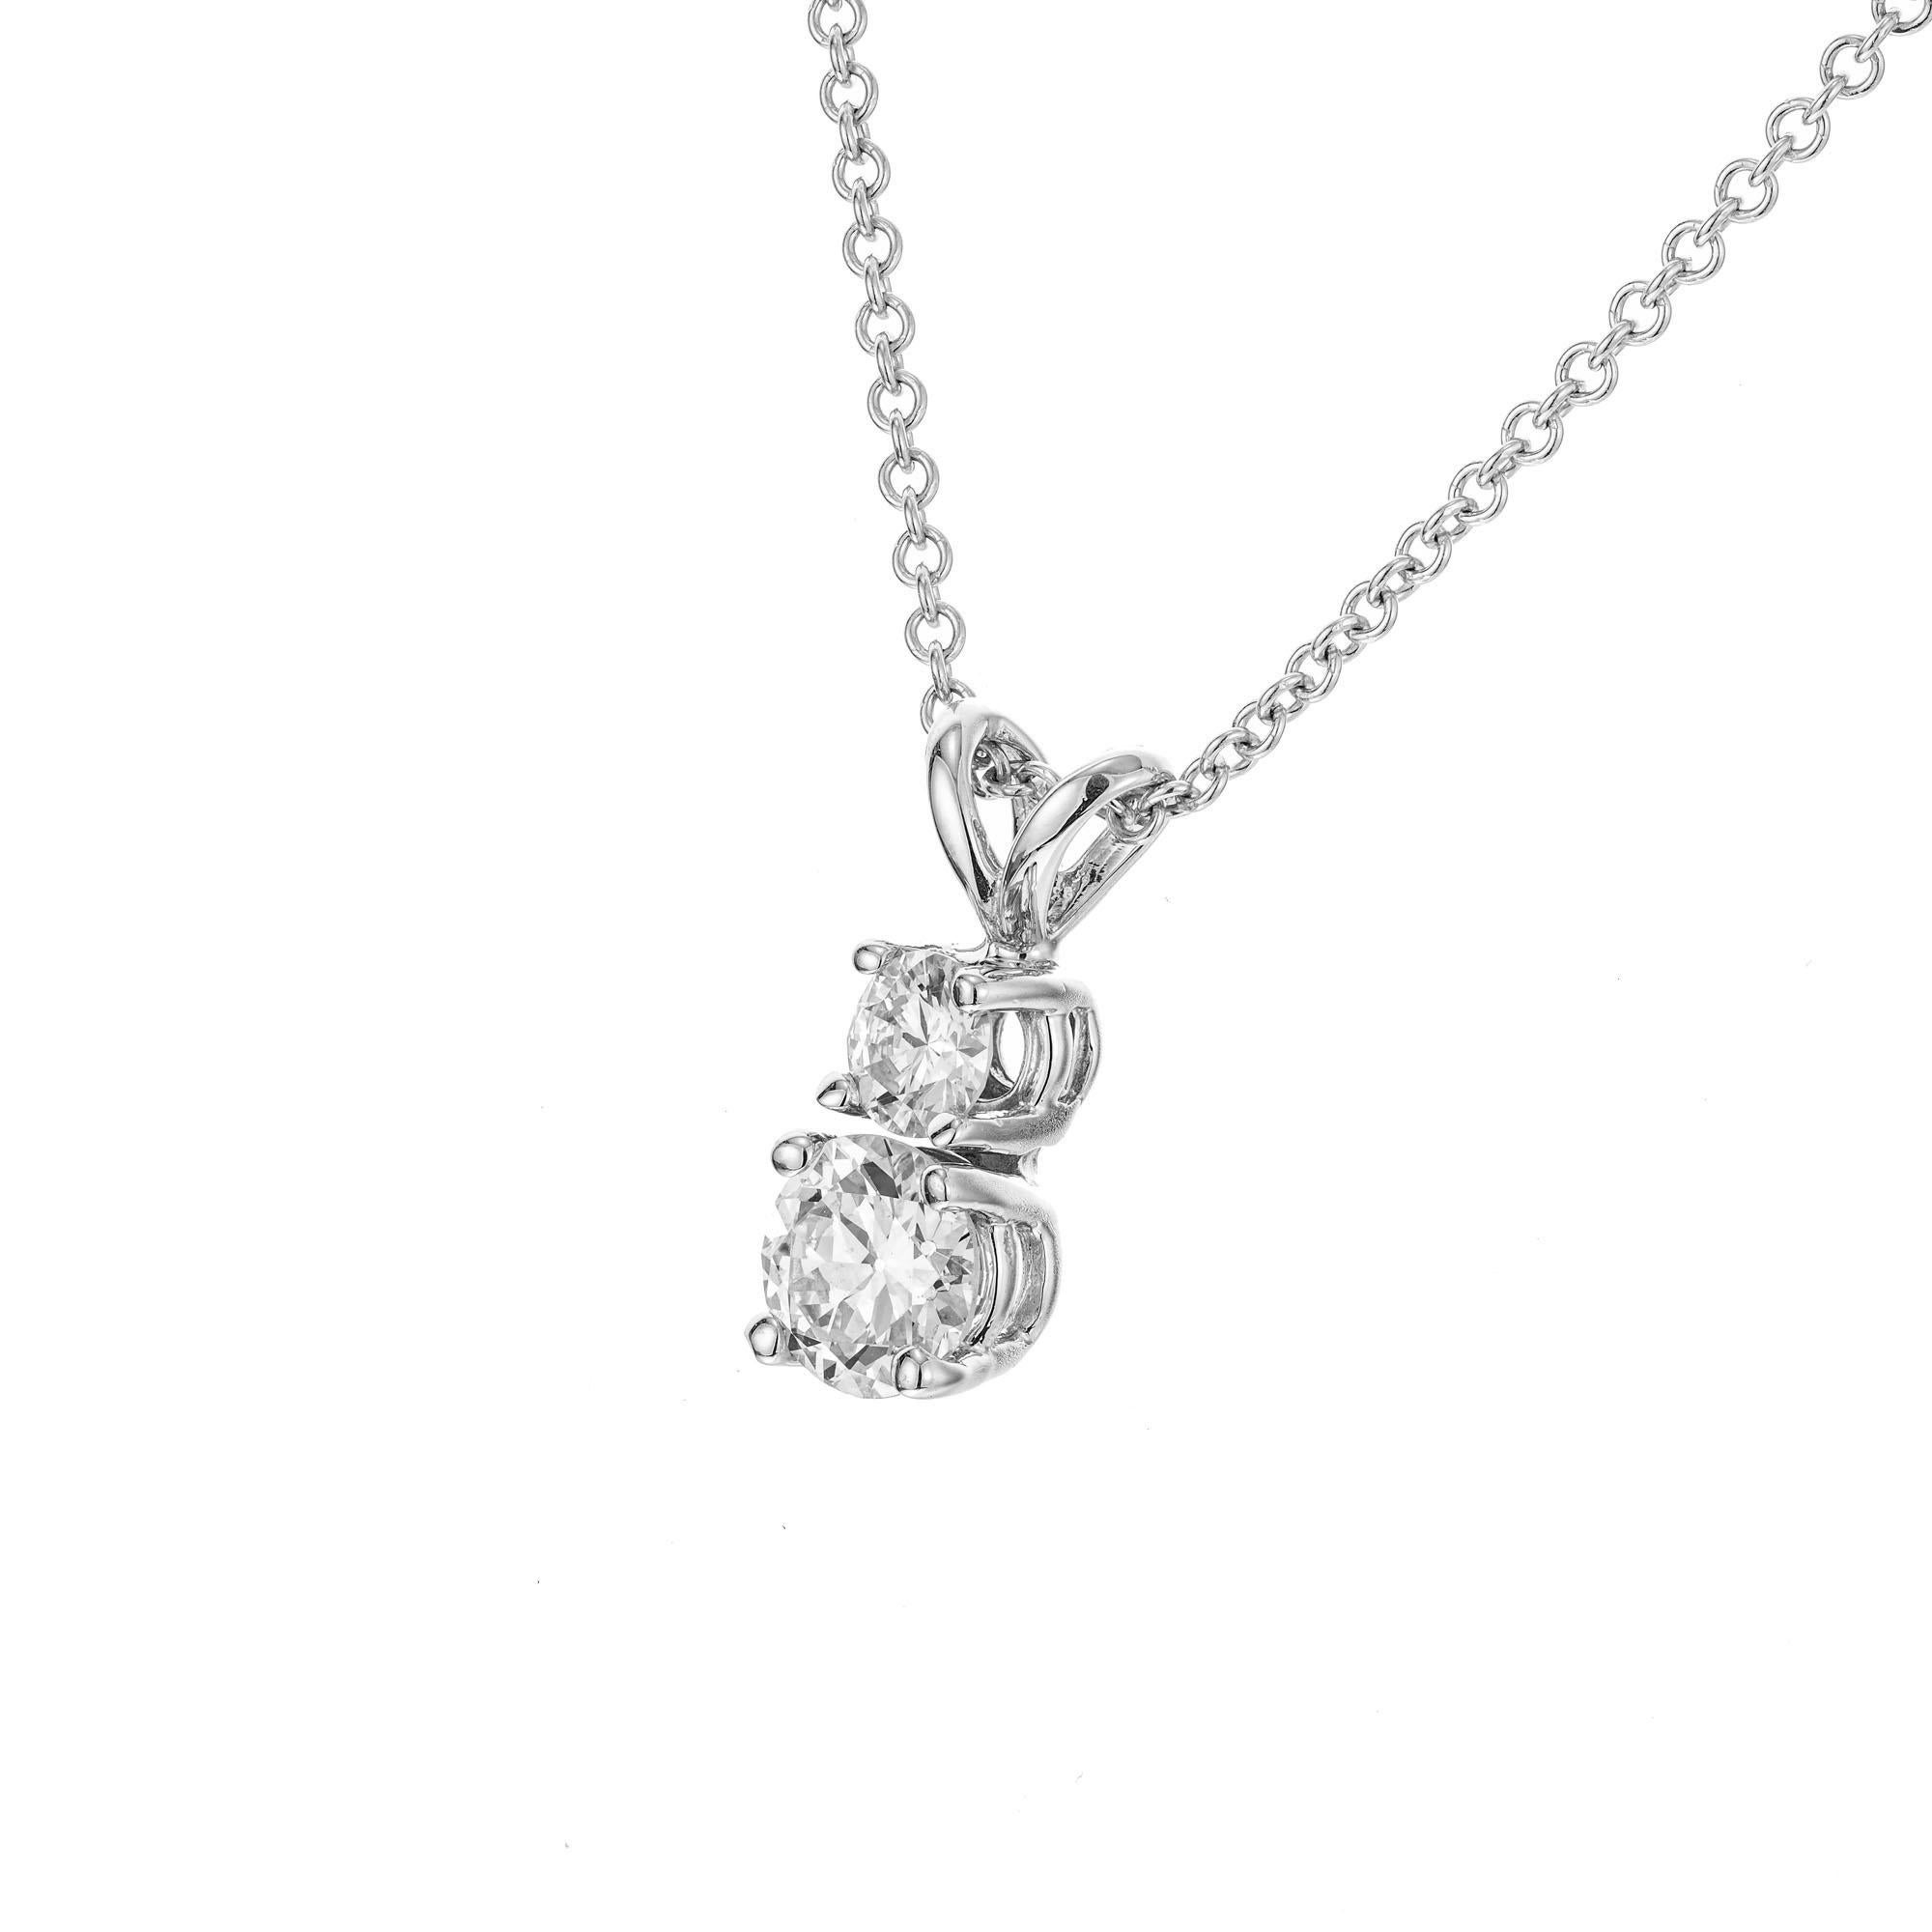 Classic two diamond pendant necklace. 1 round brilliant cut .18ct diamond with a second round brilliant cut .49ct diamonds below set in 14k white gold. 16 inch 14k white gold chain. 

1 round brilliant cut diamond, I-J VS2 approx. .49cts
1 round